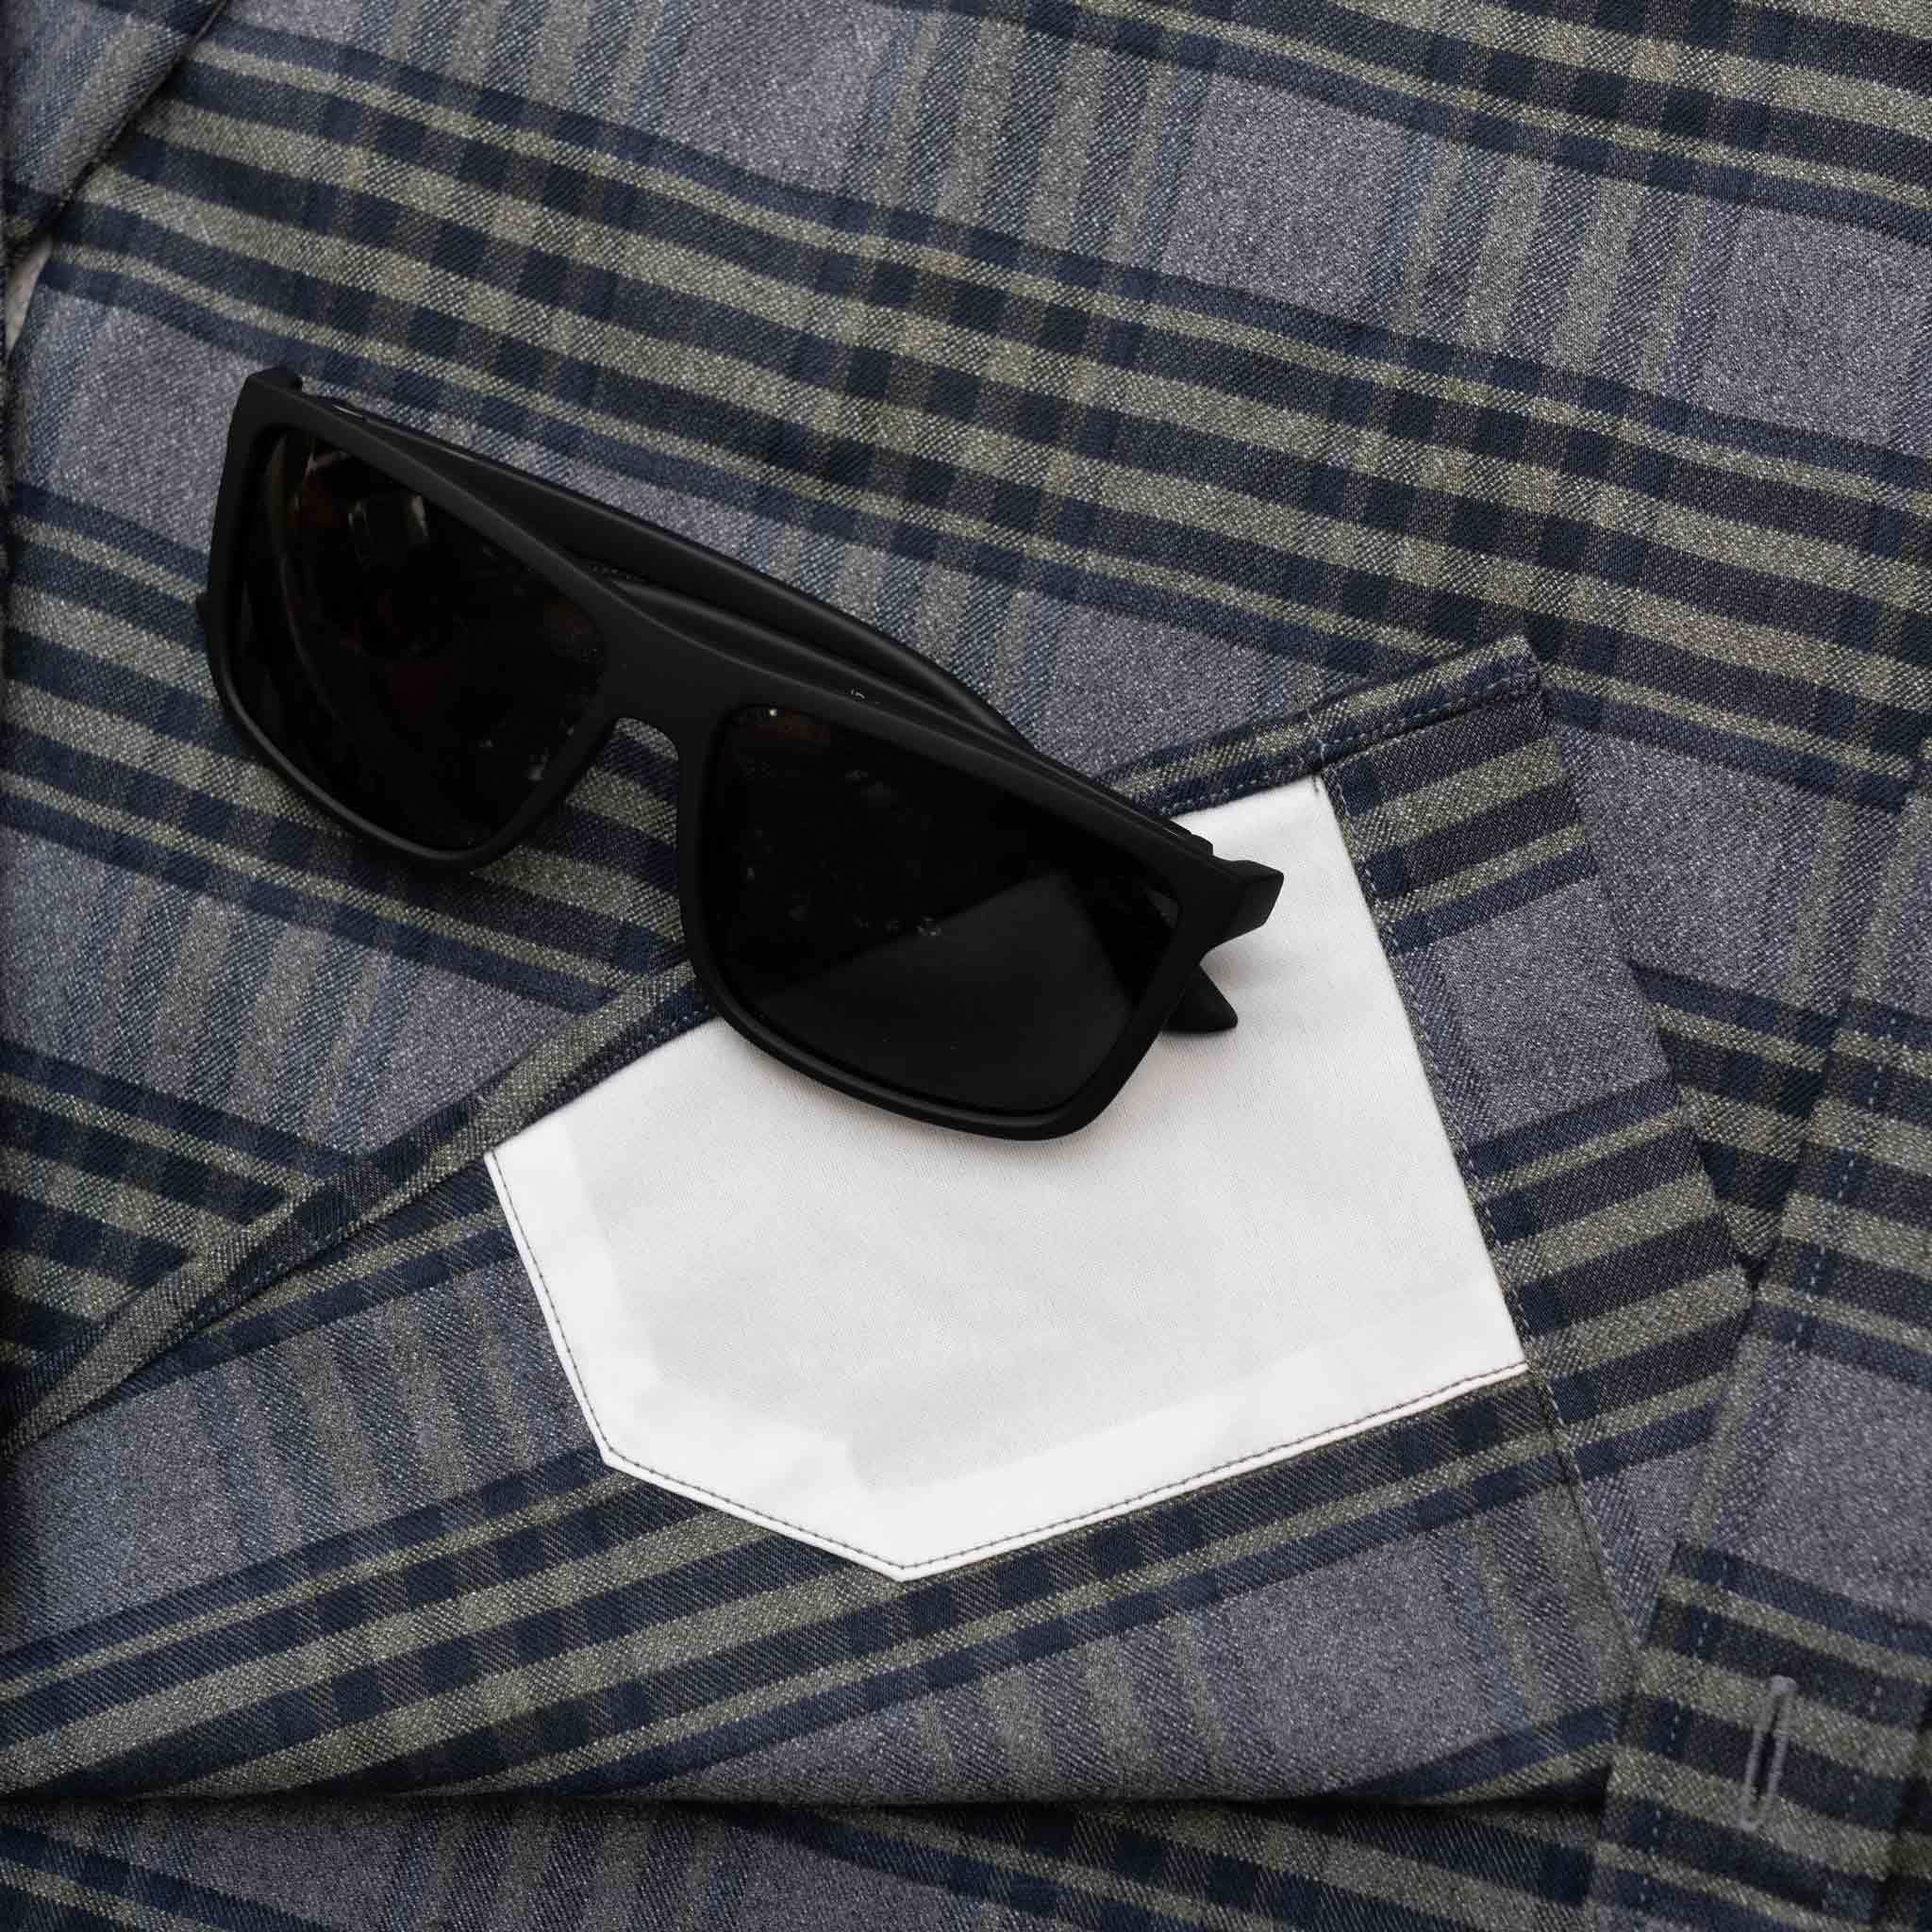 Image of sunglasses on top of the lens cloth on the grey and olive plaid flannel